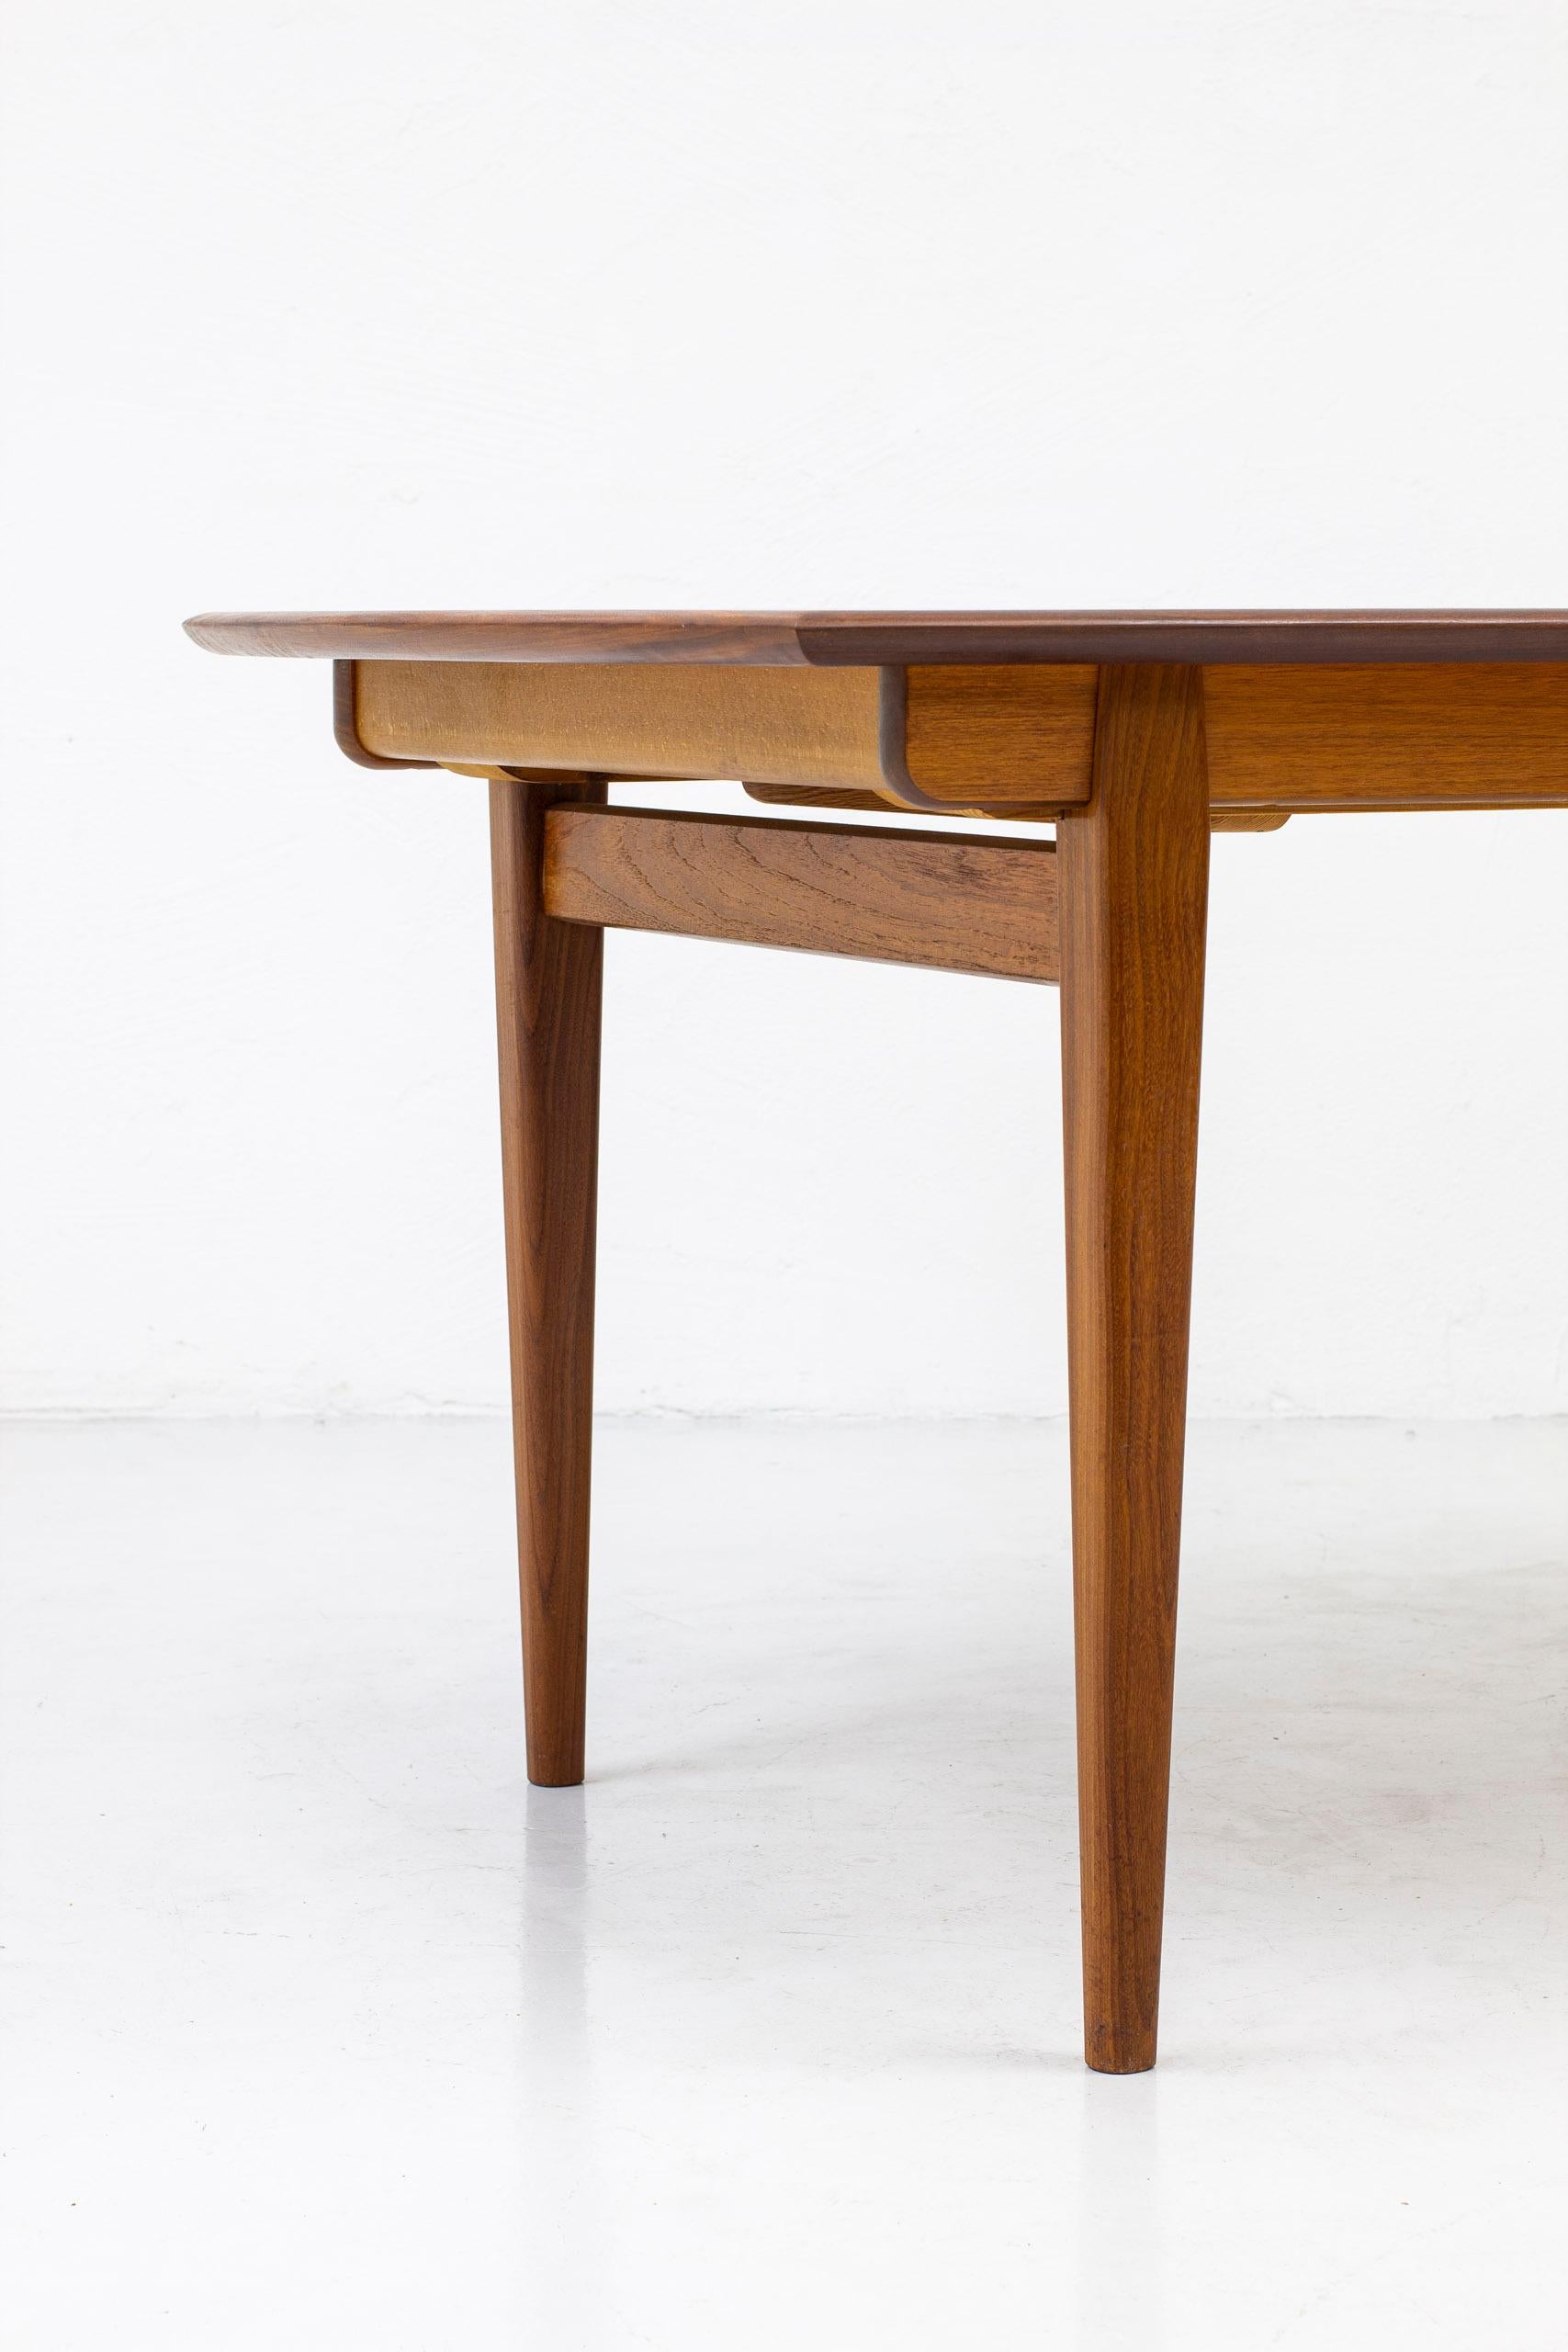 Mid-20th Century Dining Table in Teak and Walnut by Gustav Bahus, Norway, 1950s